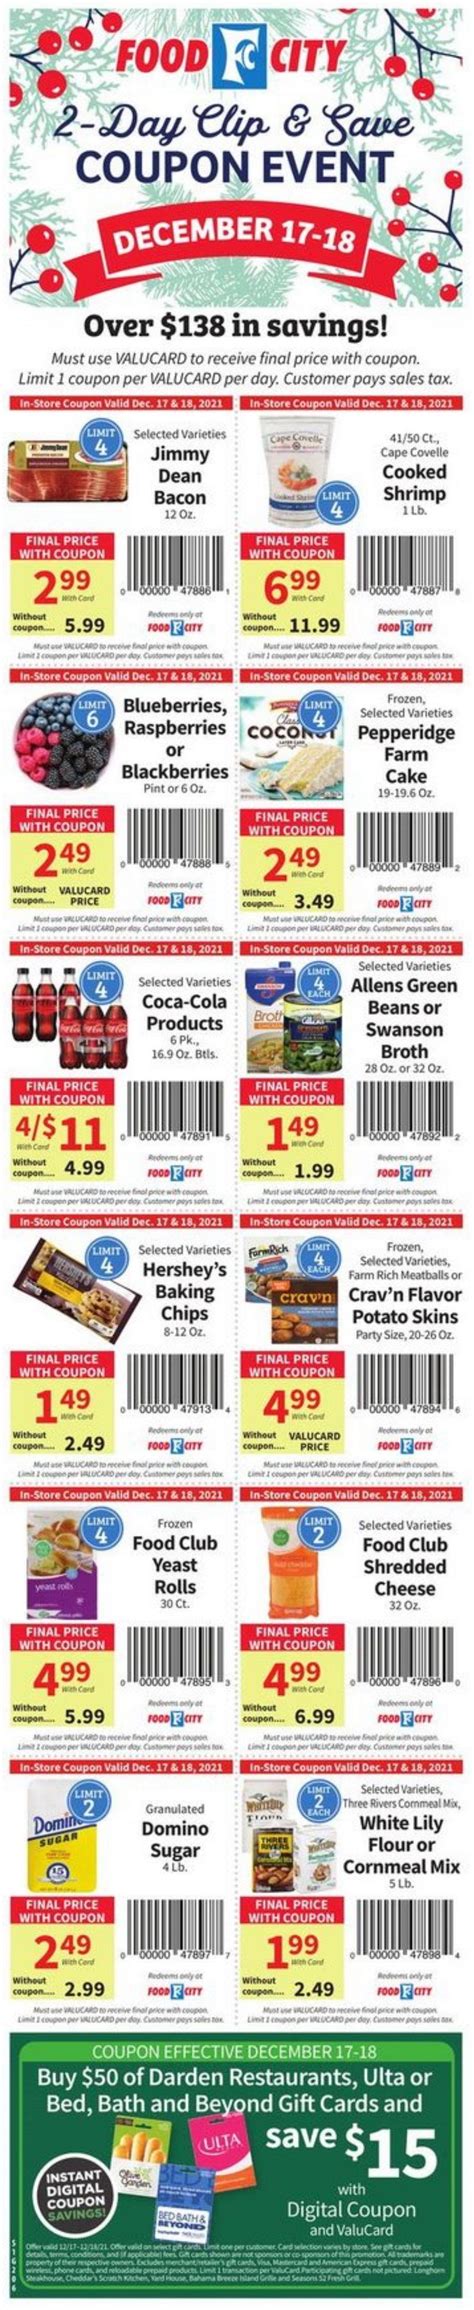 Food city abingdon va weekly ad. Weekly Ads Our now clickable Weekly Ad allows you to easily shop the latest special savings and everyday values - all in one place. Shop the ad by list or print view. Shopping Lists Stay organized with access to all of your shopping lists. 